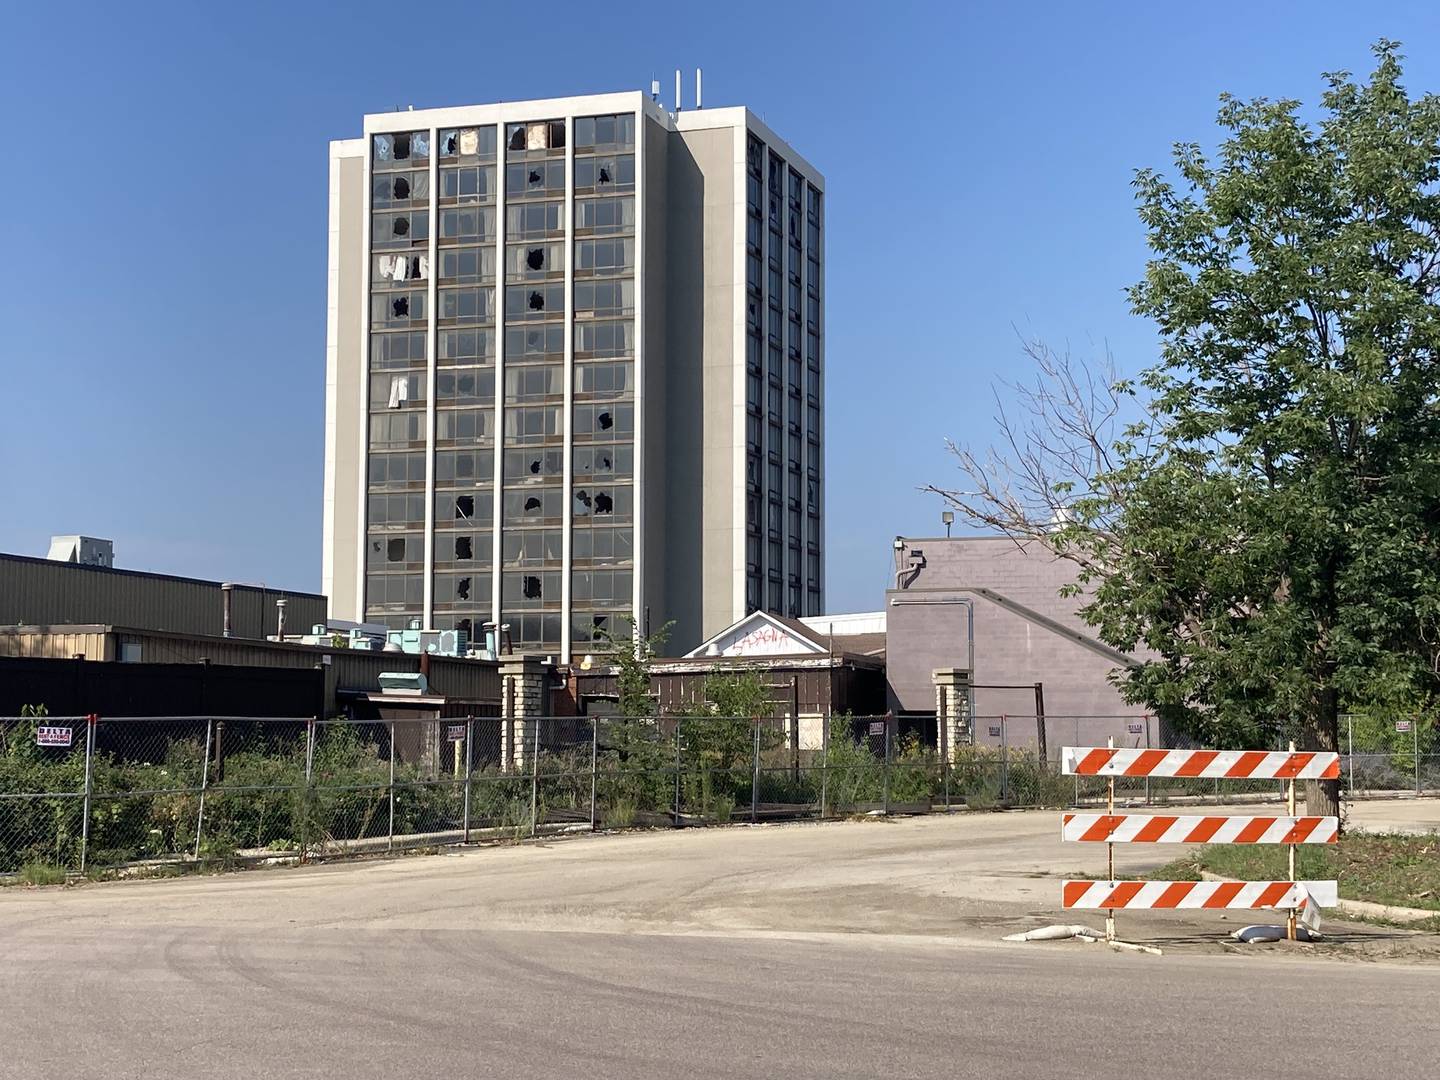 No one was injured after a fire Aug. 19, 2023 in a building located on the grounds of the former Pheasant Run Resort. St. Charles firefighters extinguished the fire, which was on the building's second floor, within 15 minutes.